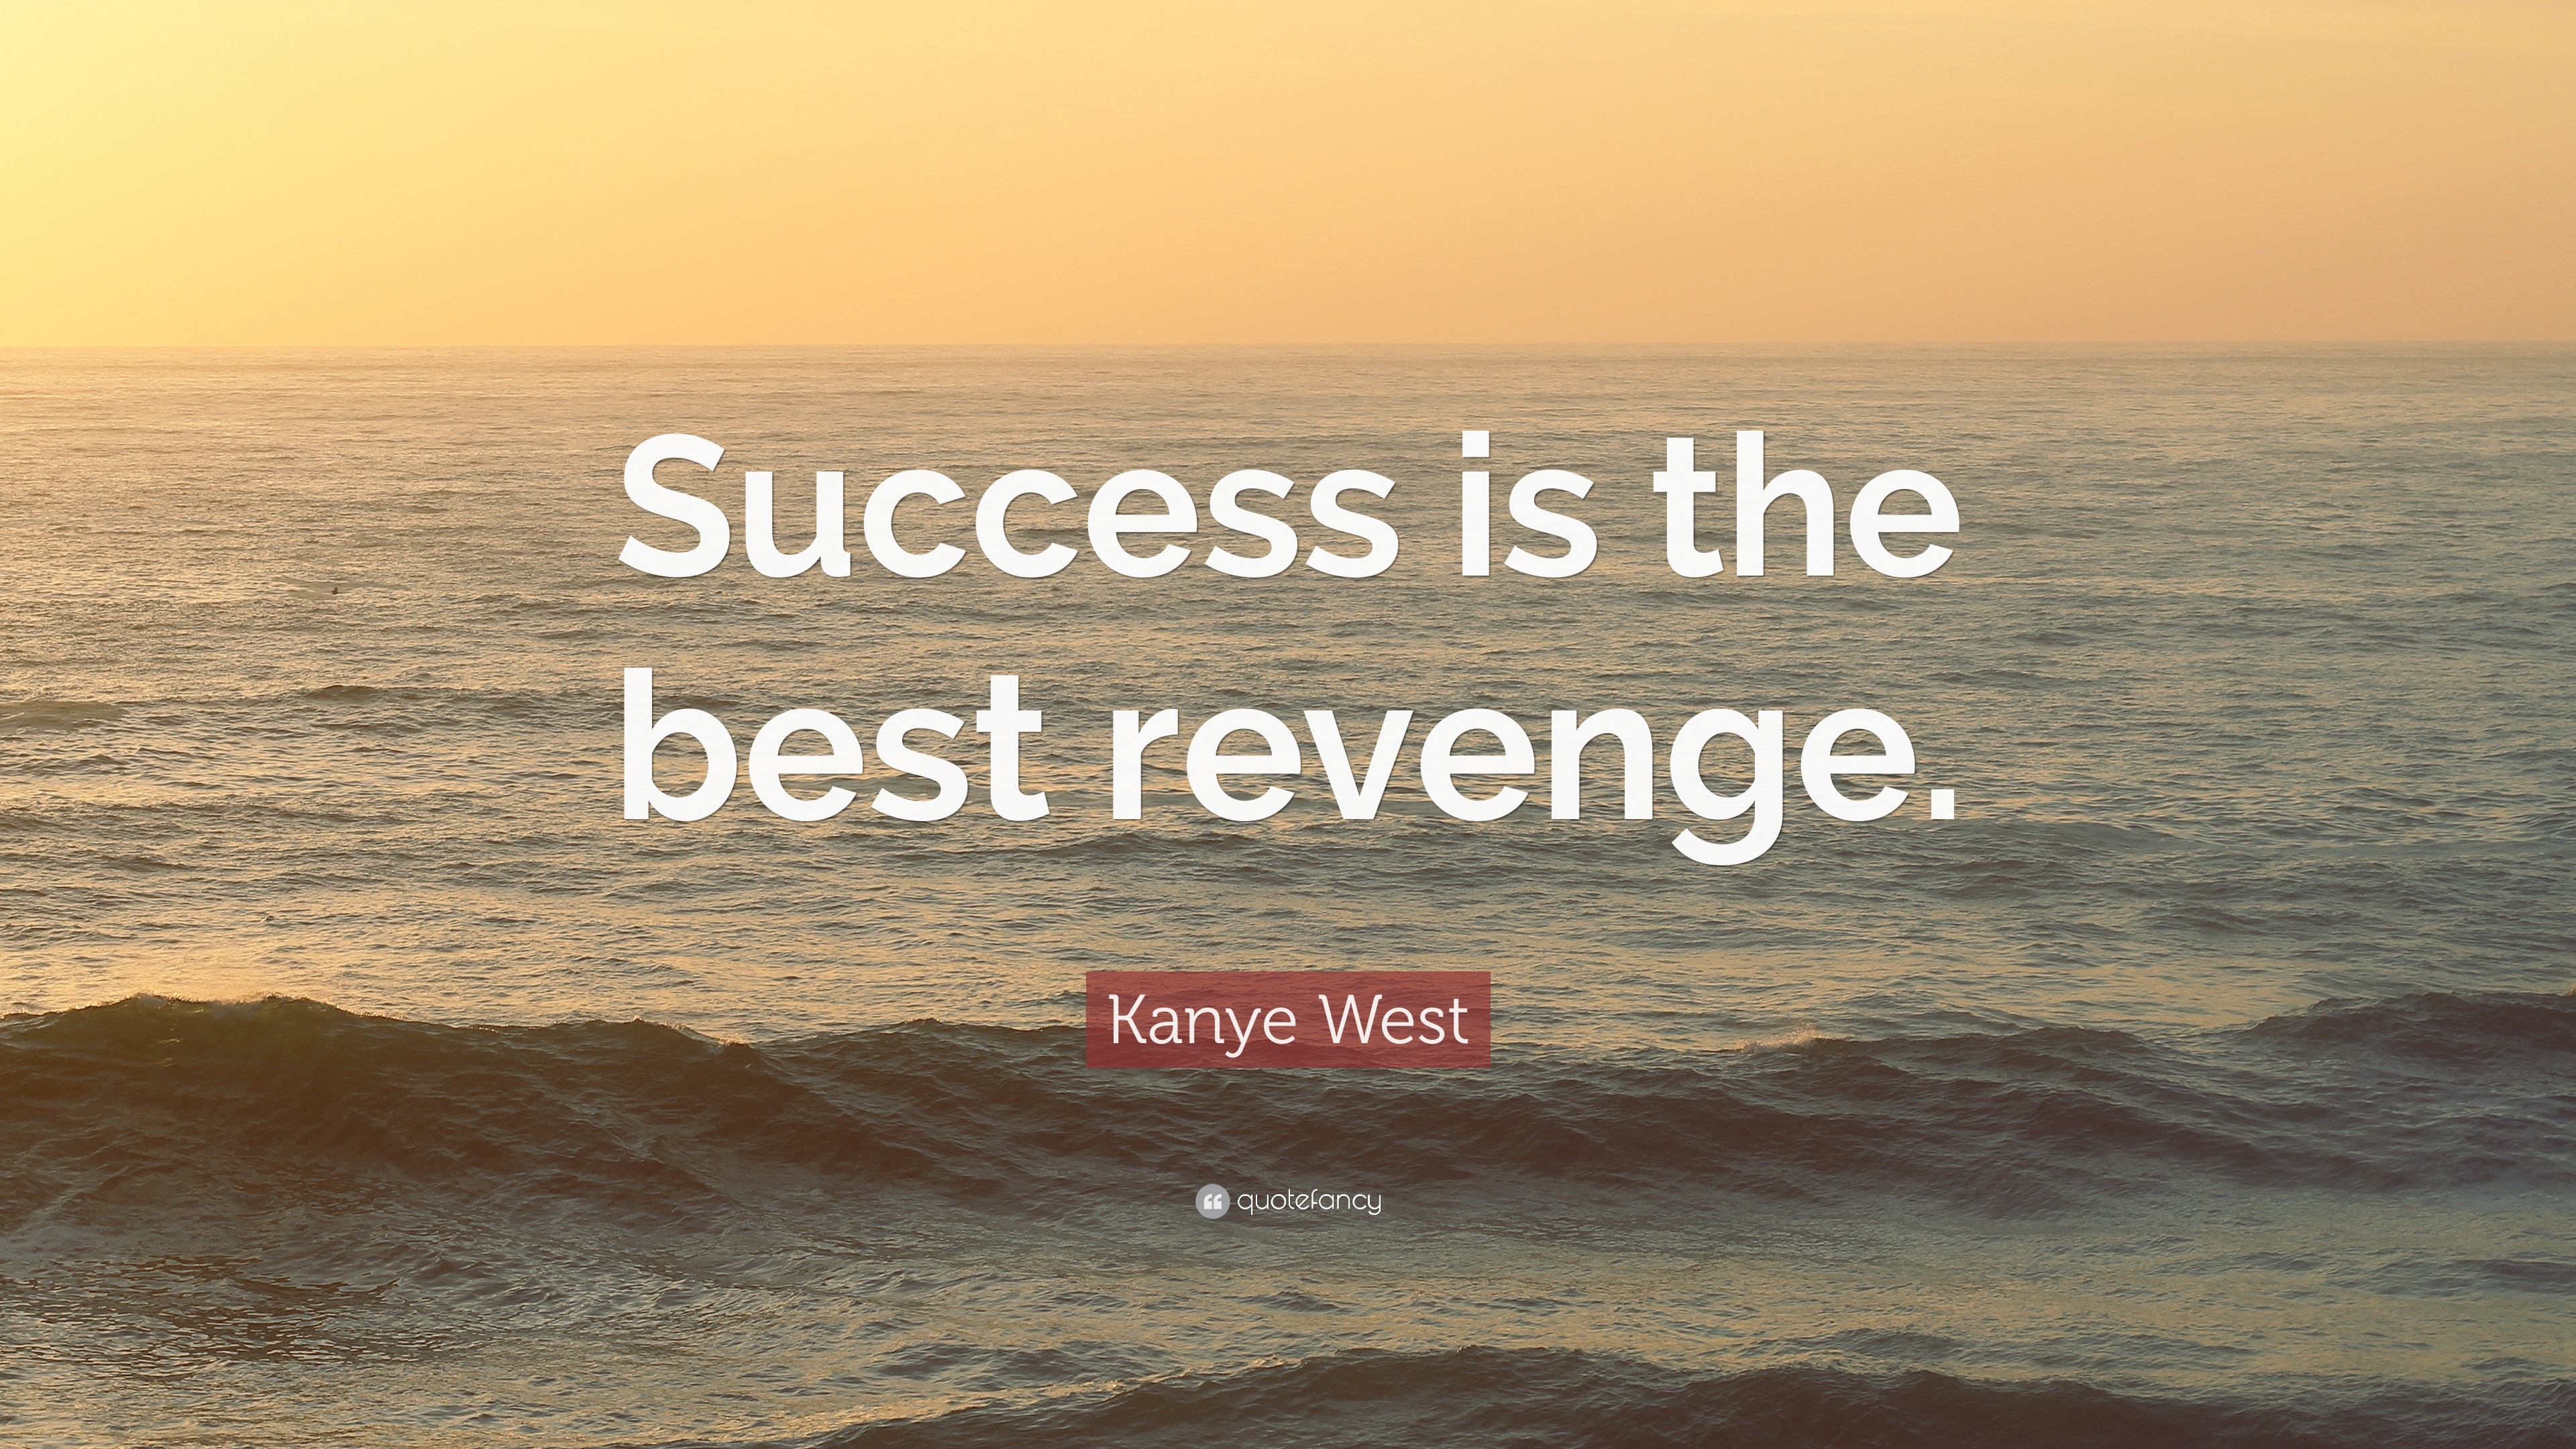 Kanye West Quote   Success  is the best  revenge   12 